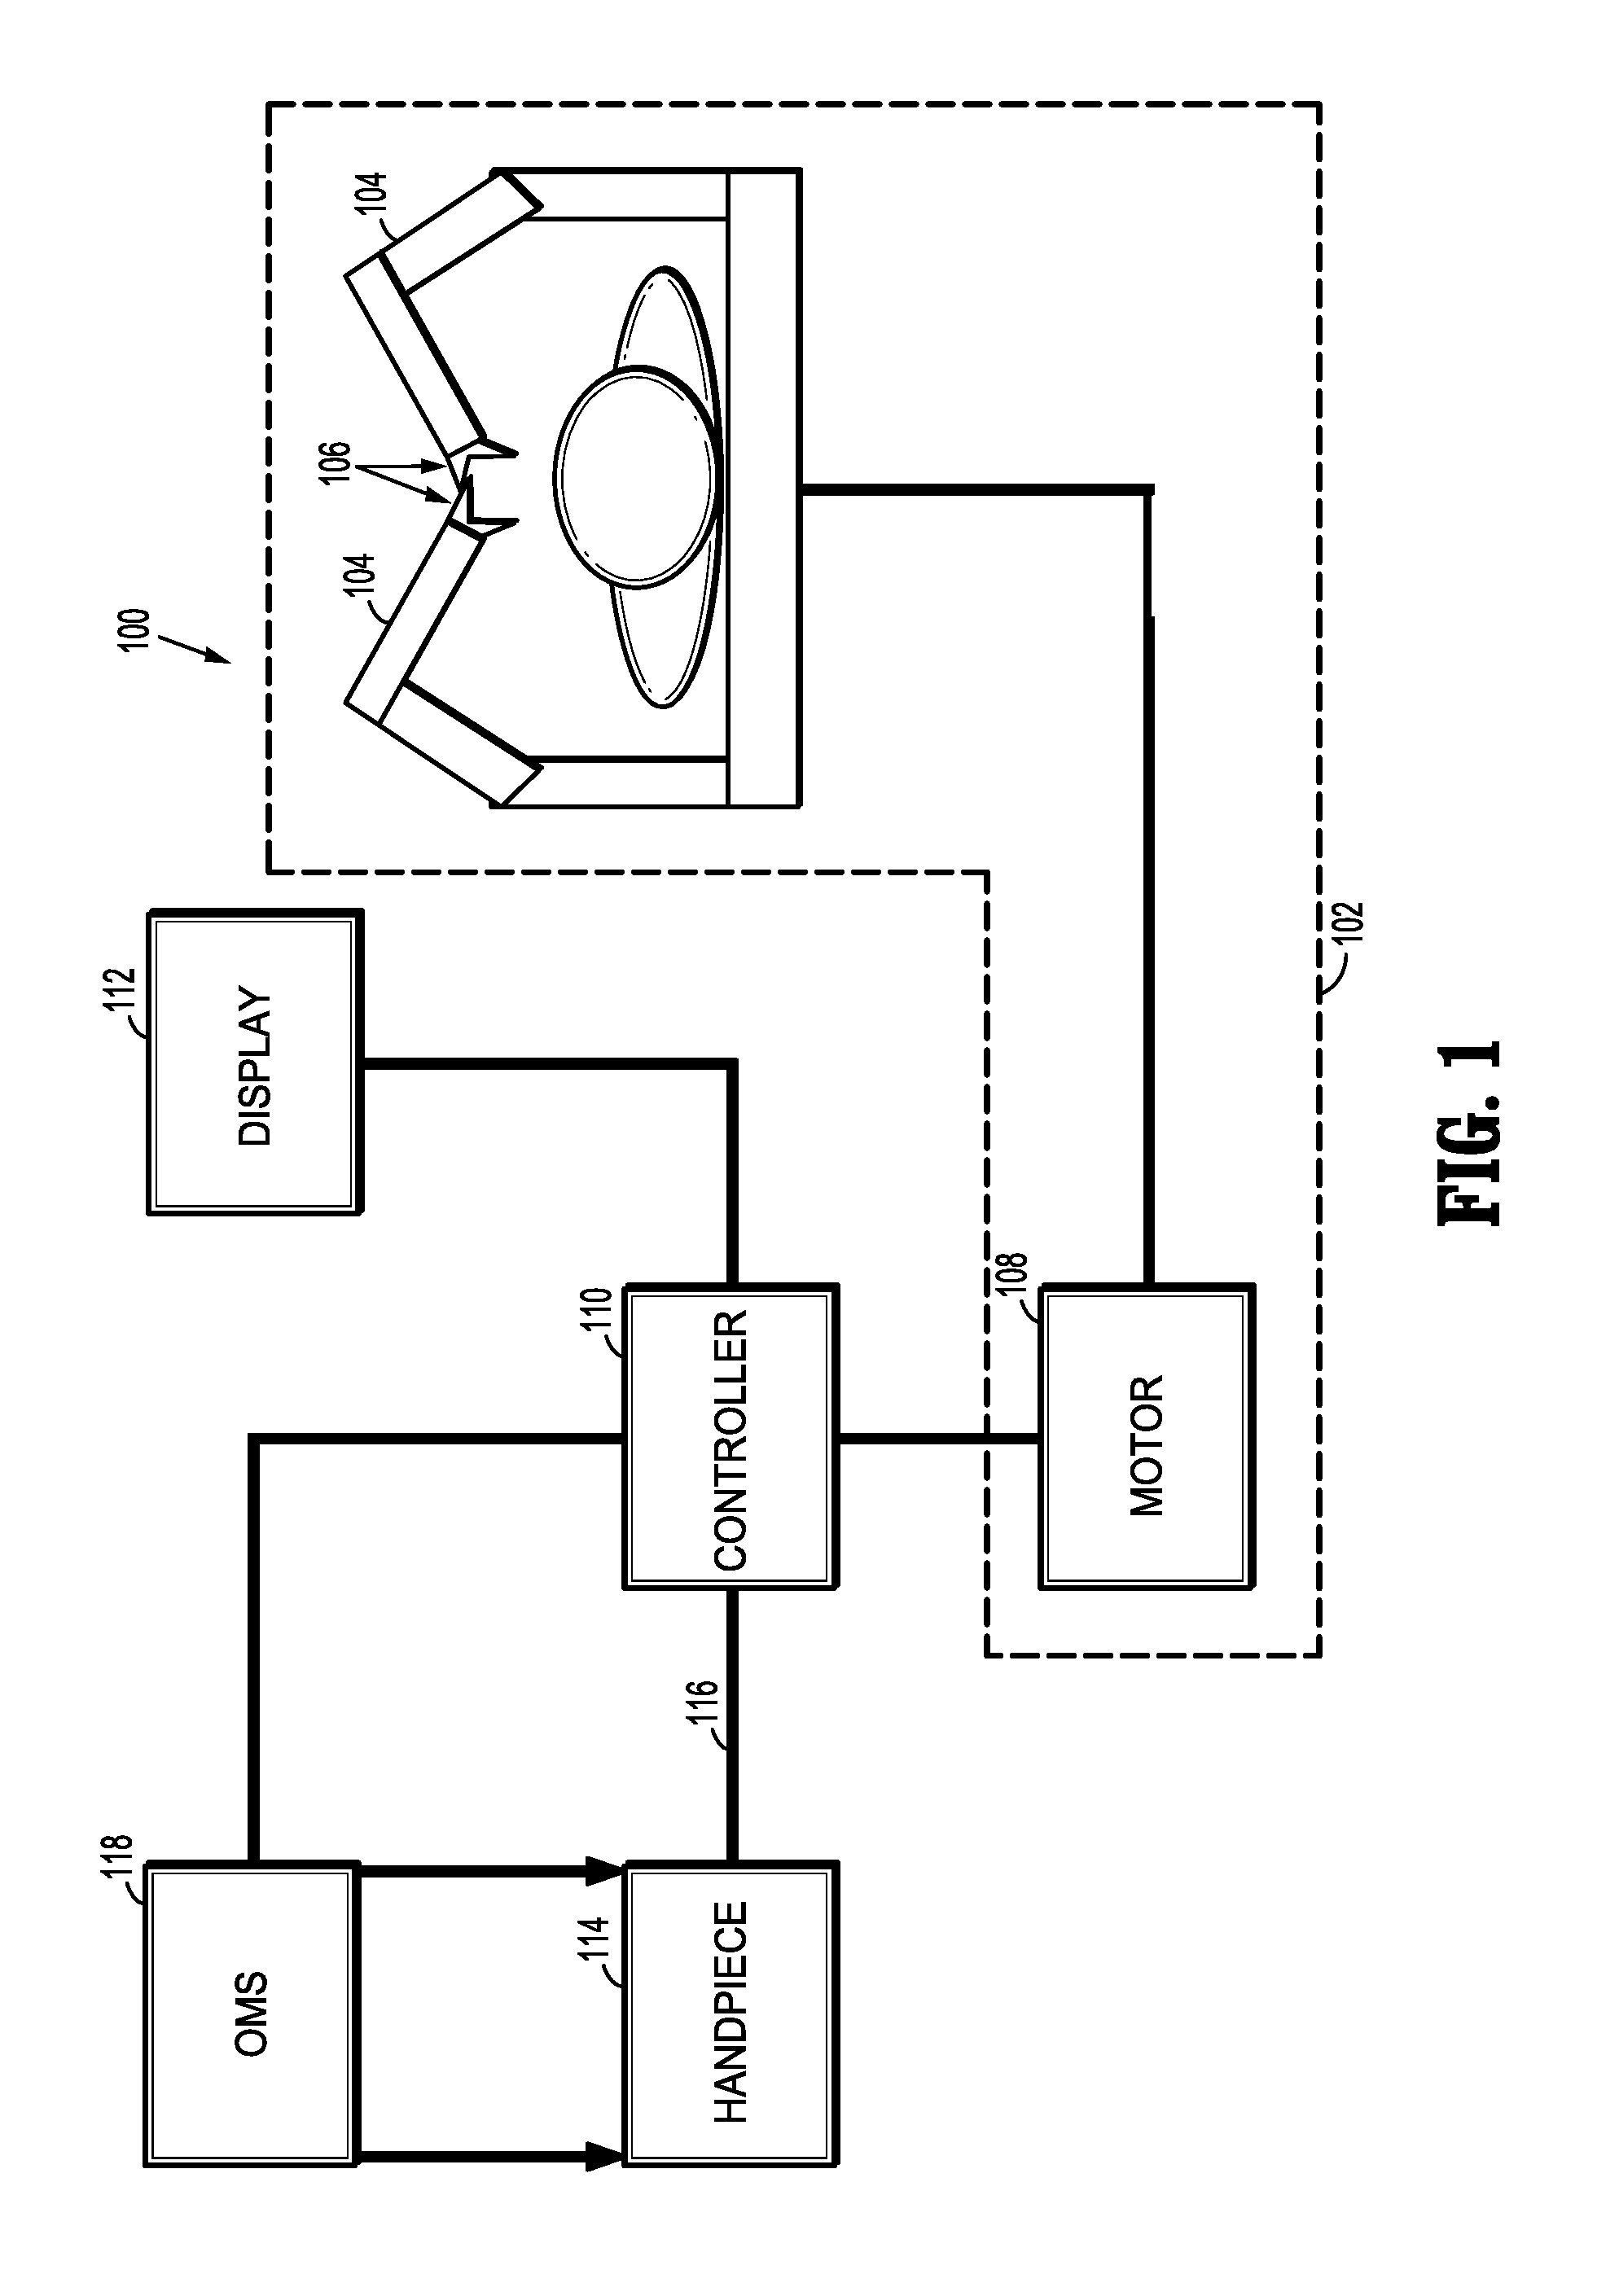 Robotic interface positioning determination systems and methods